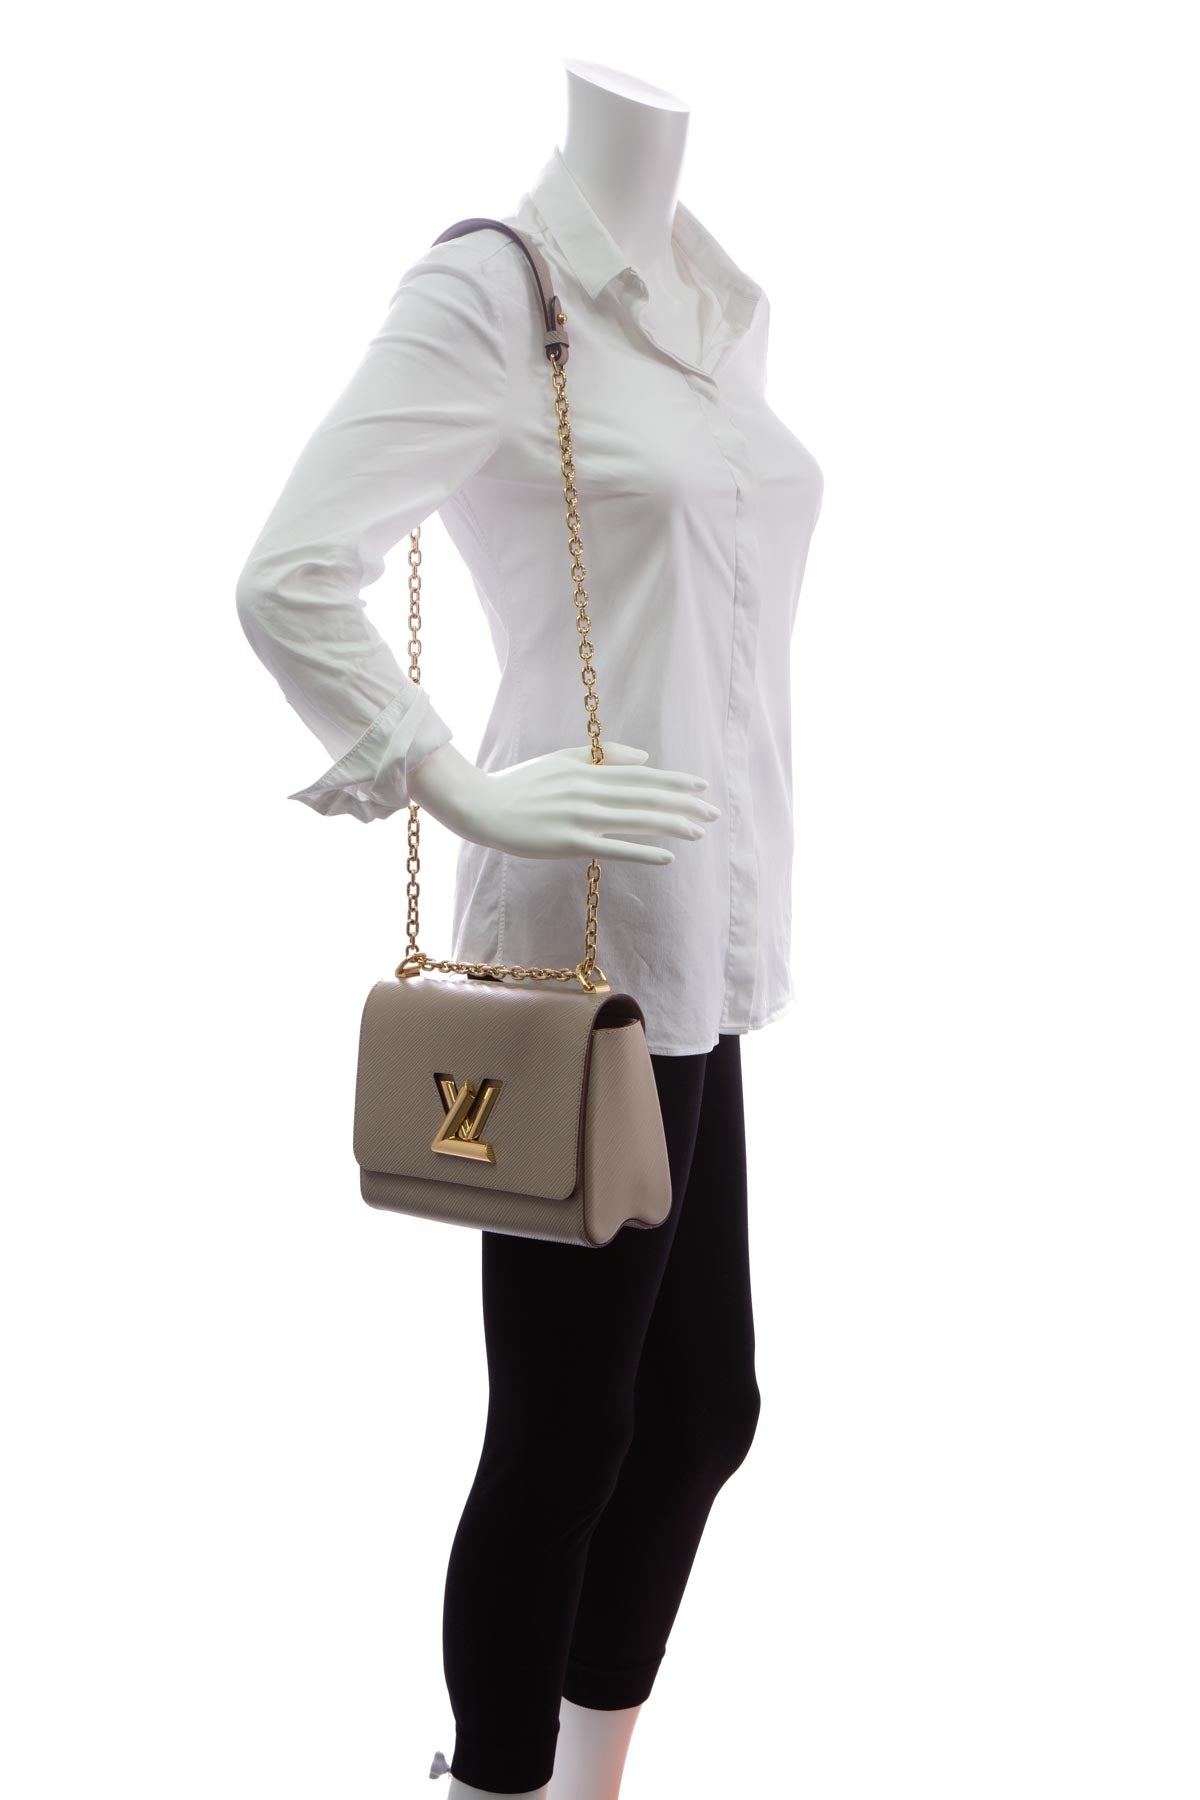 Louis Vuitton LOCKIT MM V.CA GALET Grey/Beige Leather Tote BRAND NEW!!!